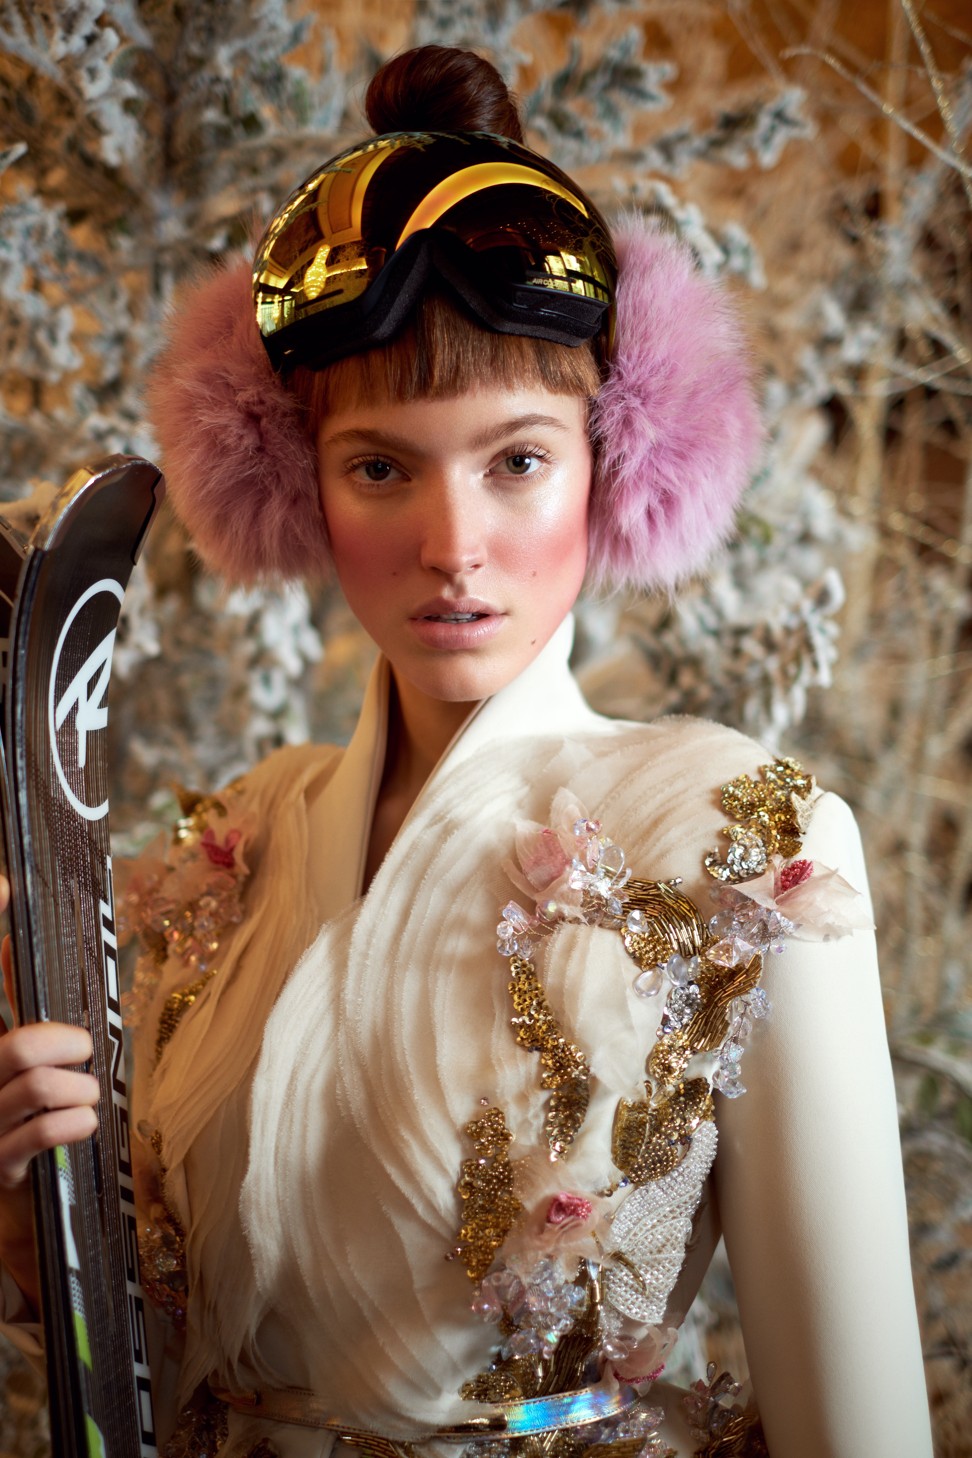 Elie Saab Haute Couture jasmine double crepe suit with wide flair leg trousers; jacket adorned with organza ruffles sequins, crystals and multiple beaded flowers; Peauluxe earmuffs; Rossignol skis; stylist’s own ski goggles